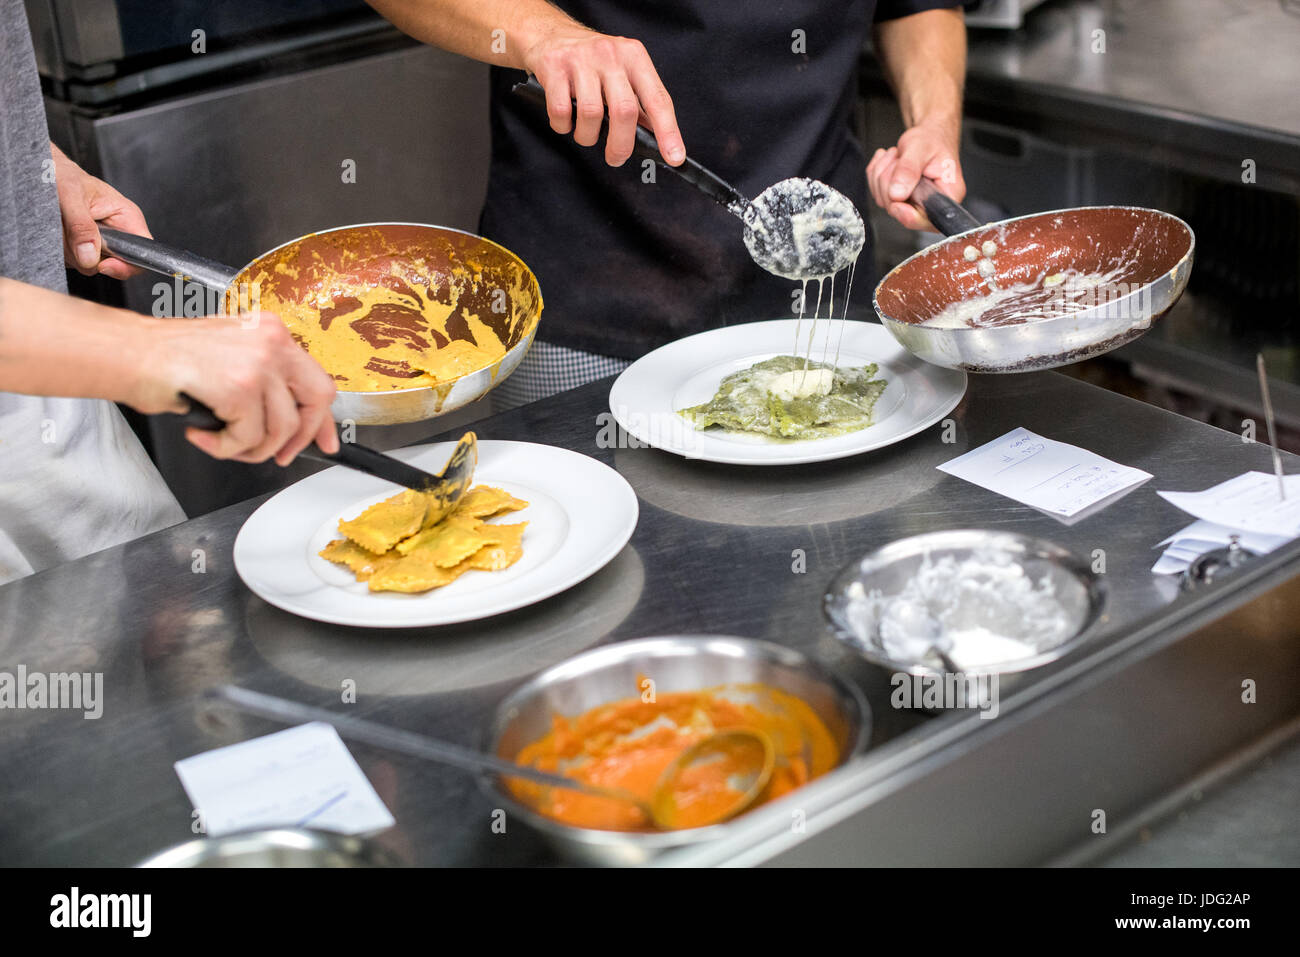 close-up of two unrecognizable chefs in aprons standing next to table in restaurant kitchen and serving ravioli pasta in plates from frying pans Stock Photo